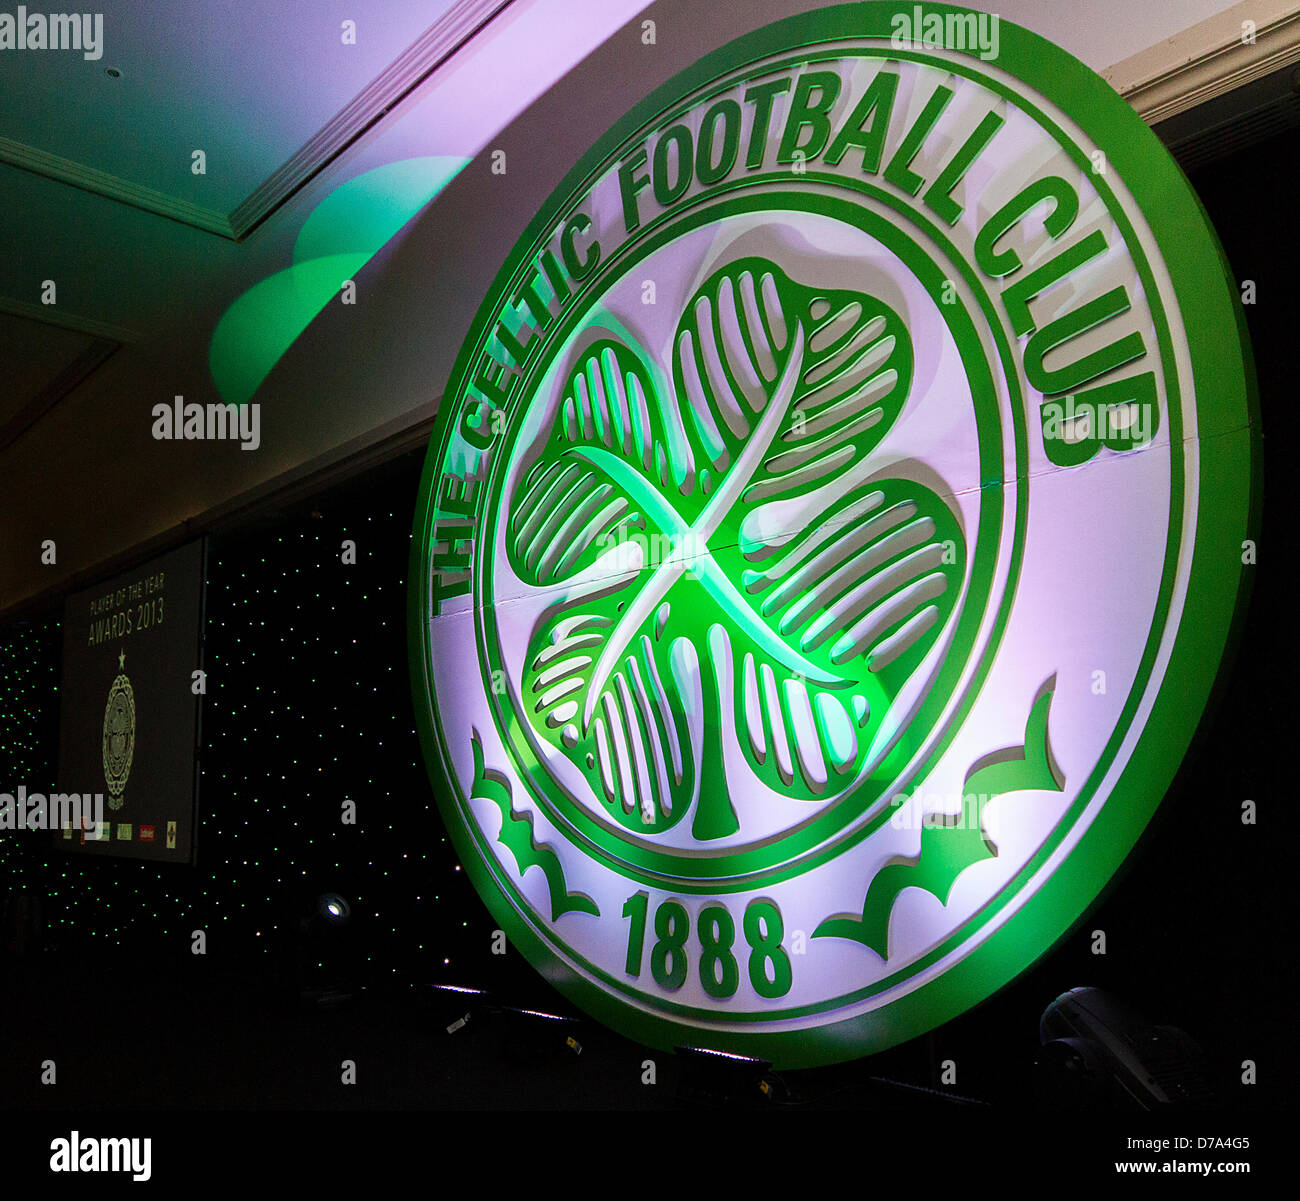 29.04.2013 Glasgow, Scotland. Stage is set for the Celtic Football Club Player of the year awards ceremony. Stock Photo